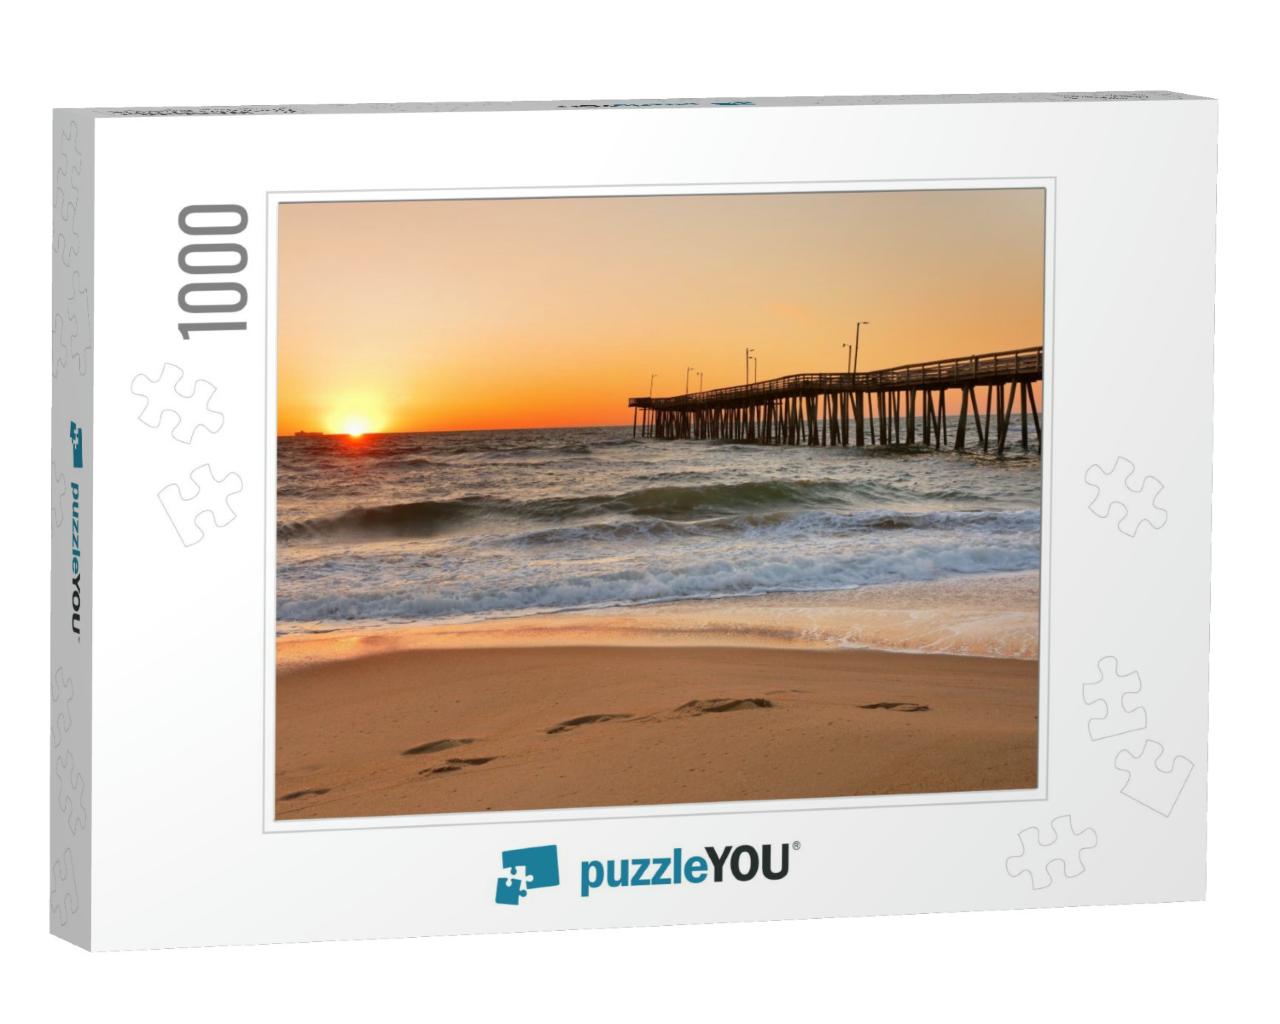 Fishing Pier At Sunrise At Virginia Beach, Virginia, Usa... Jigsaw Puzzle with 1000 pieces